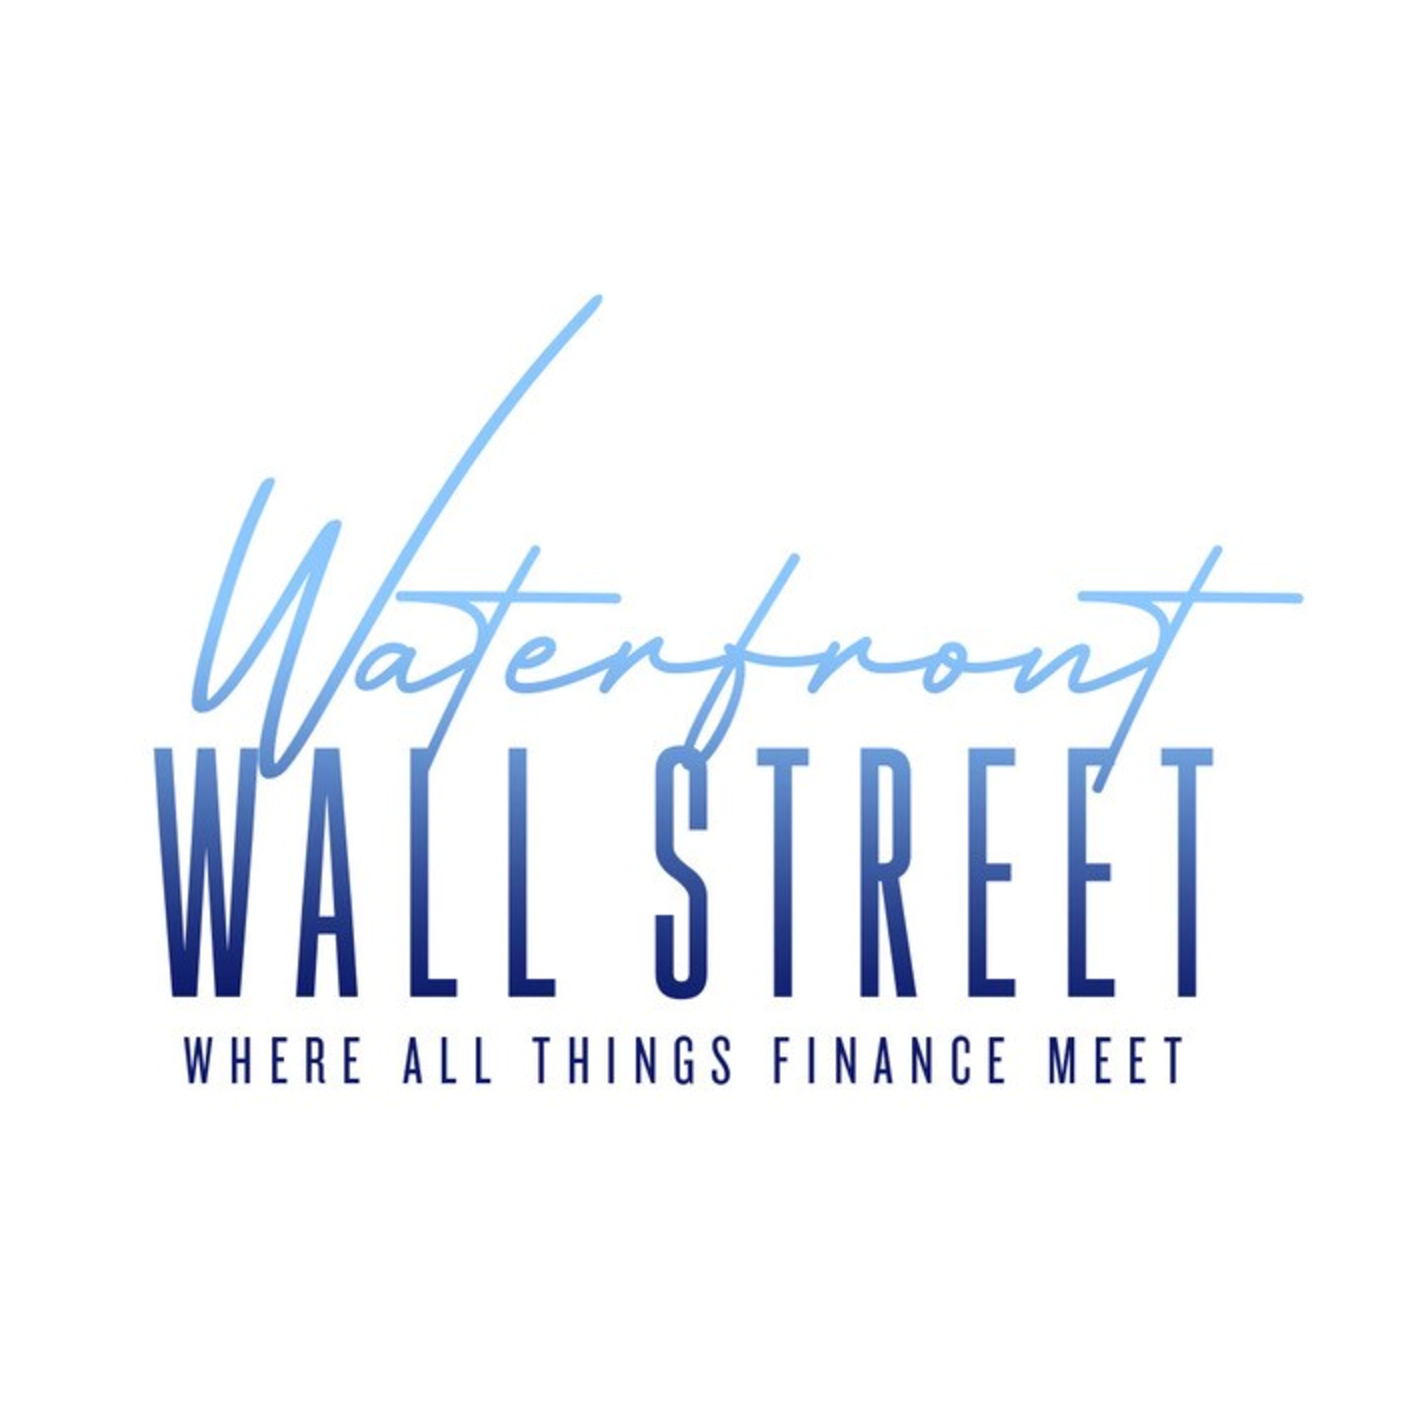 John Purcell | Waterfront Wall Street Business